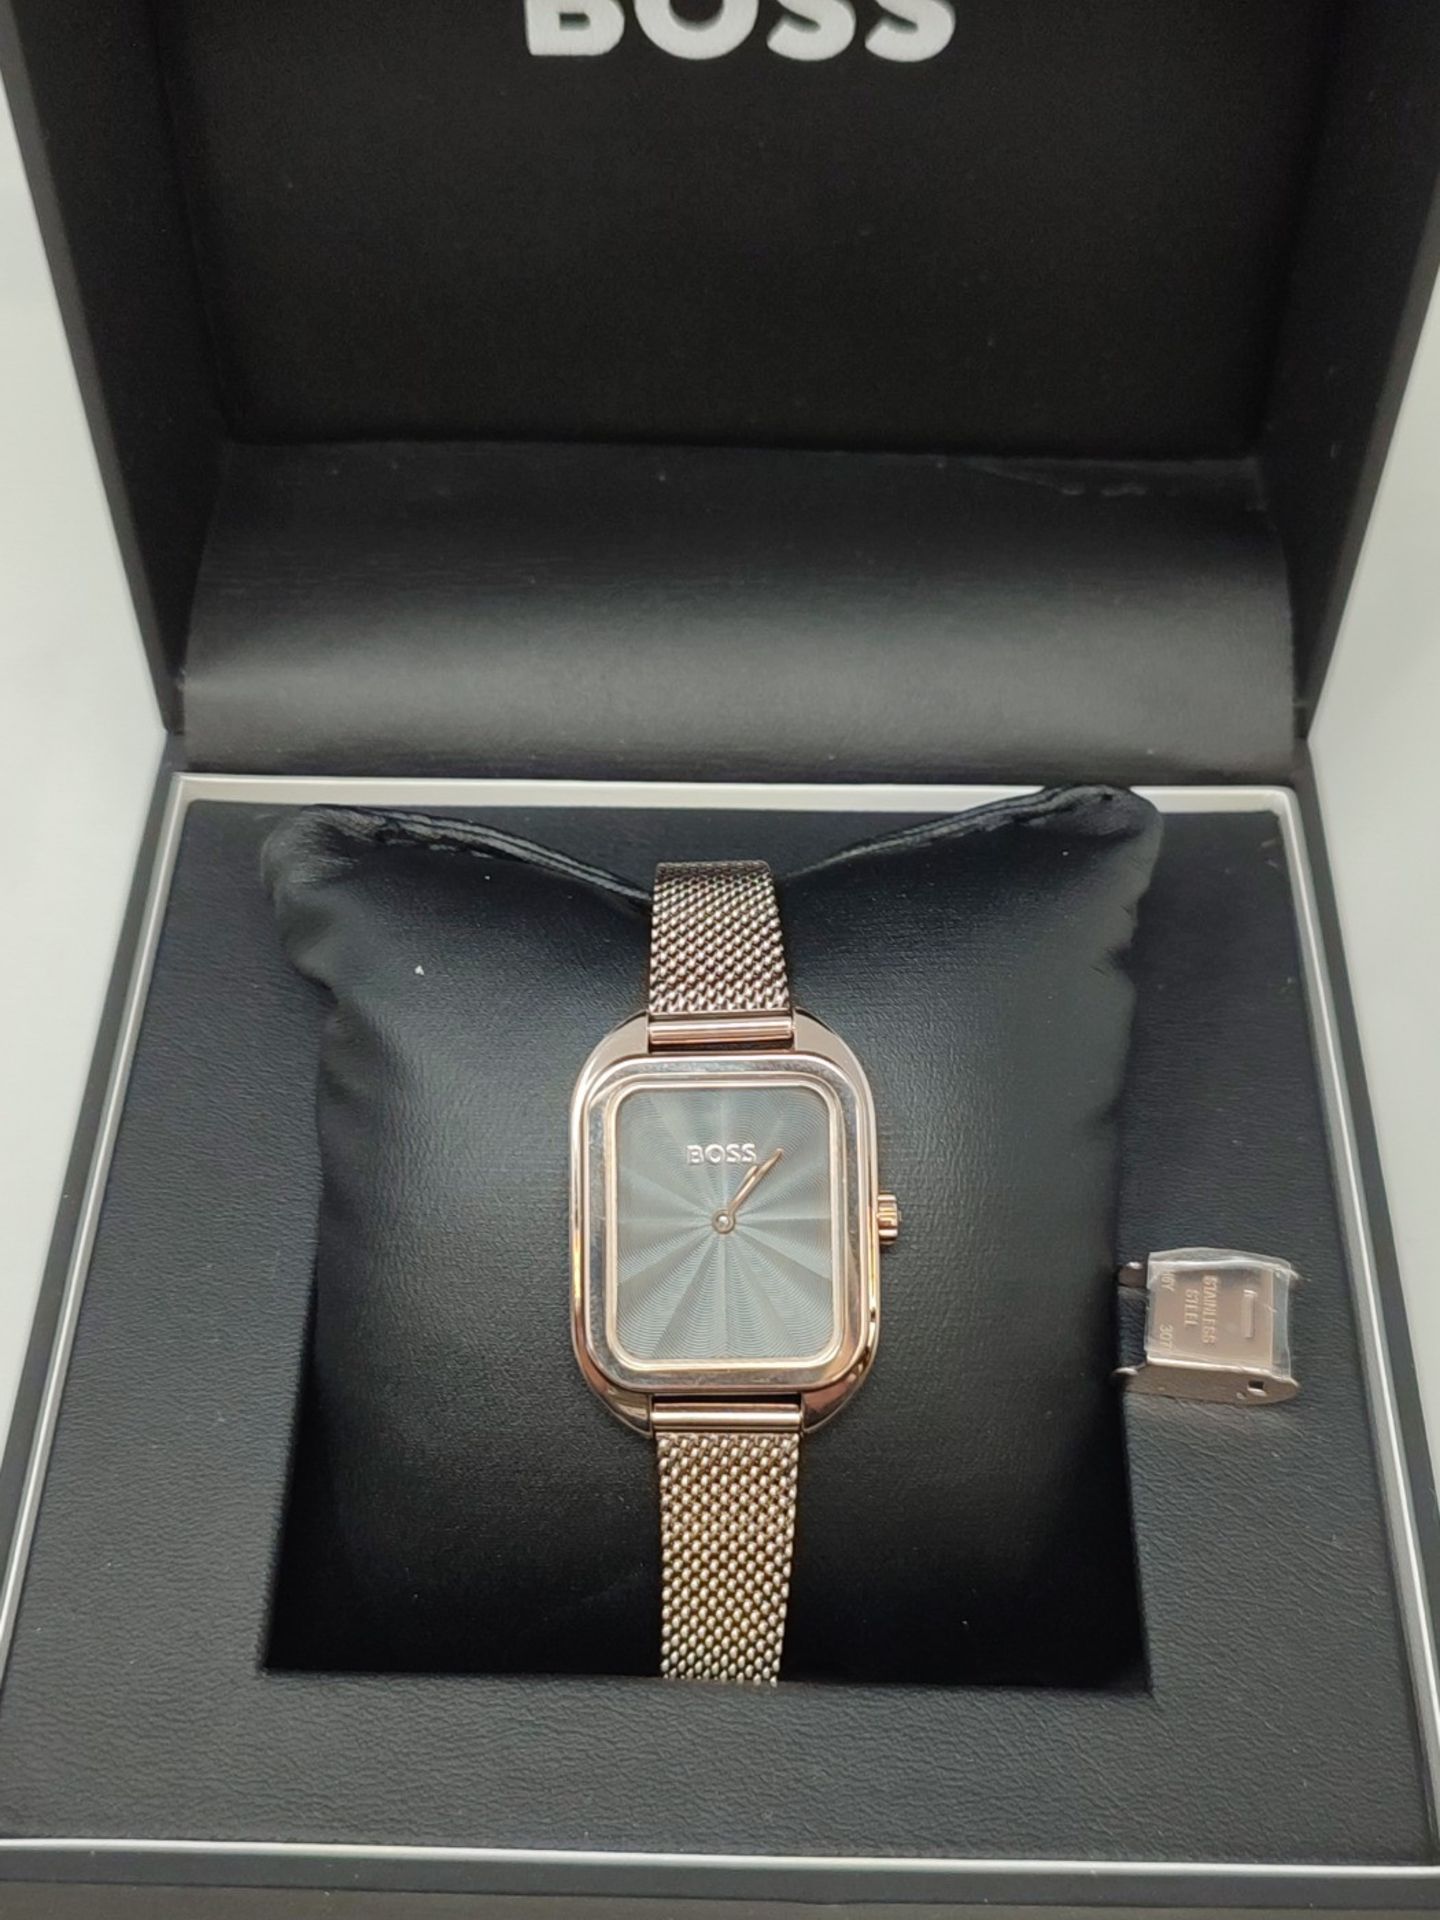 RRP £279.00 BOSS Analog quartz watch for women with rose gold stainless steel bracelet - 1502683 - Image 5 of 6